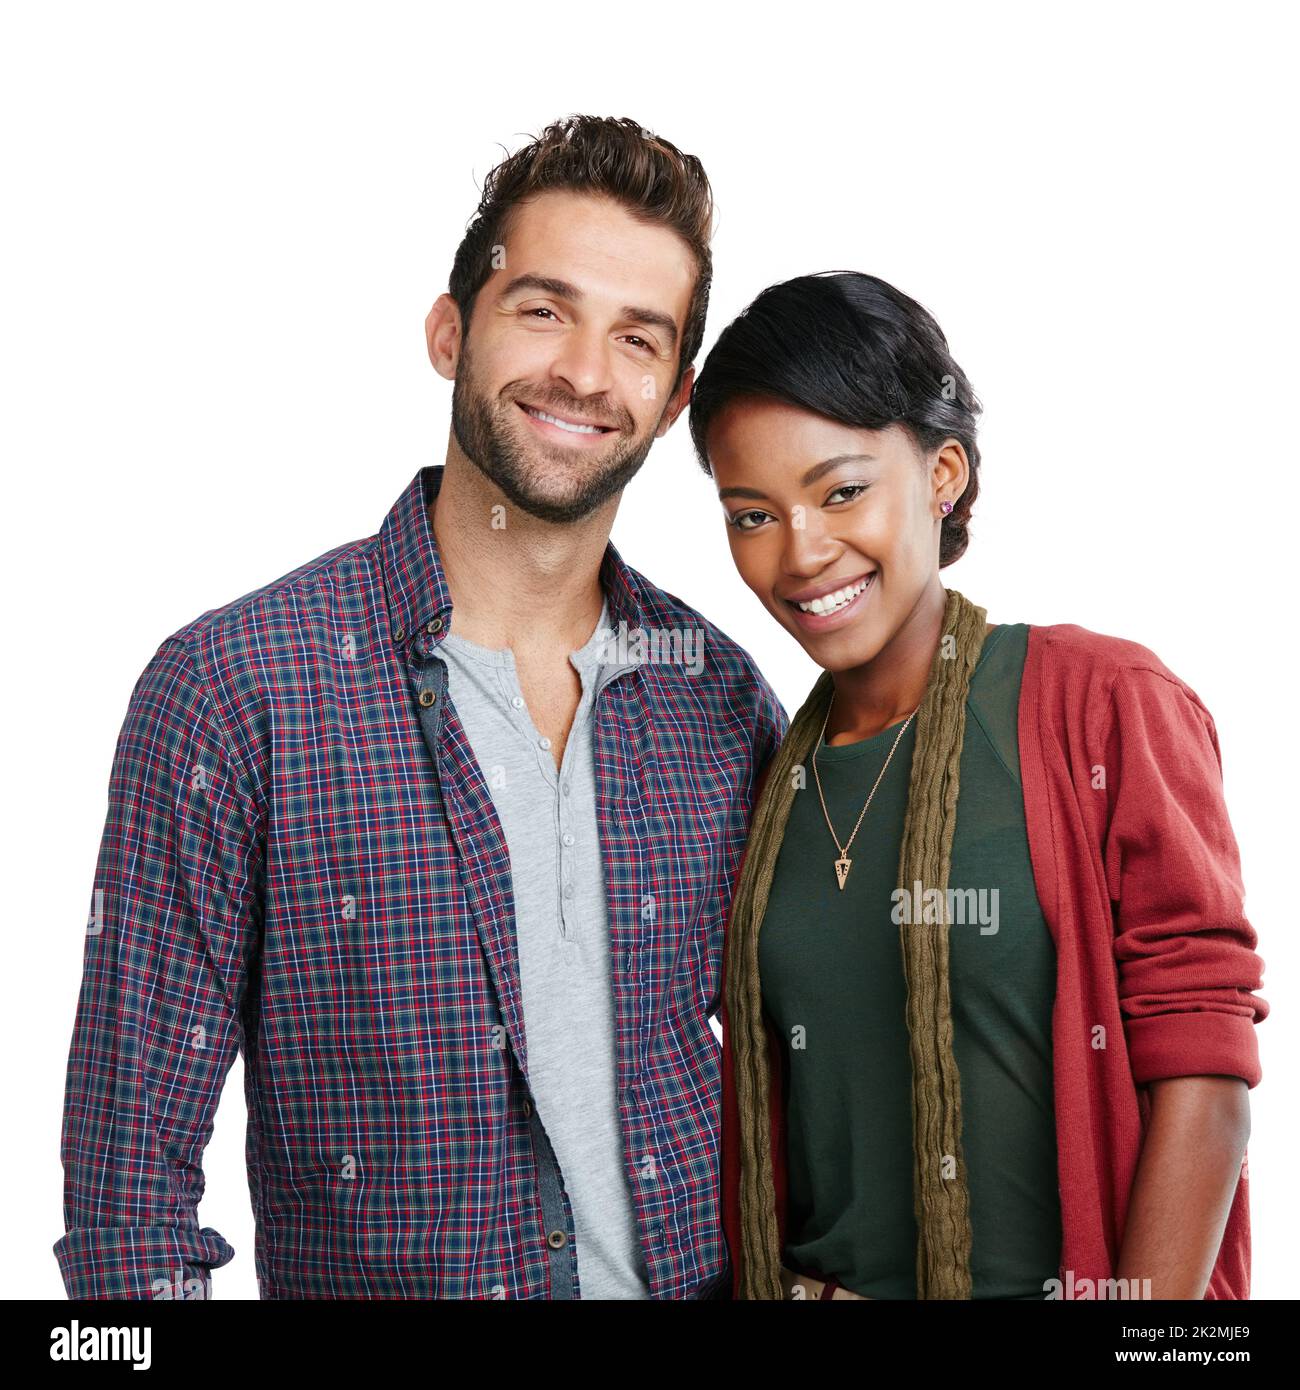 Together is the happiest place to be. Studio portrait of a happy couple standing together against a white background. Stock Photo